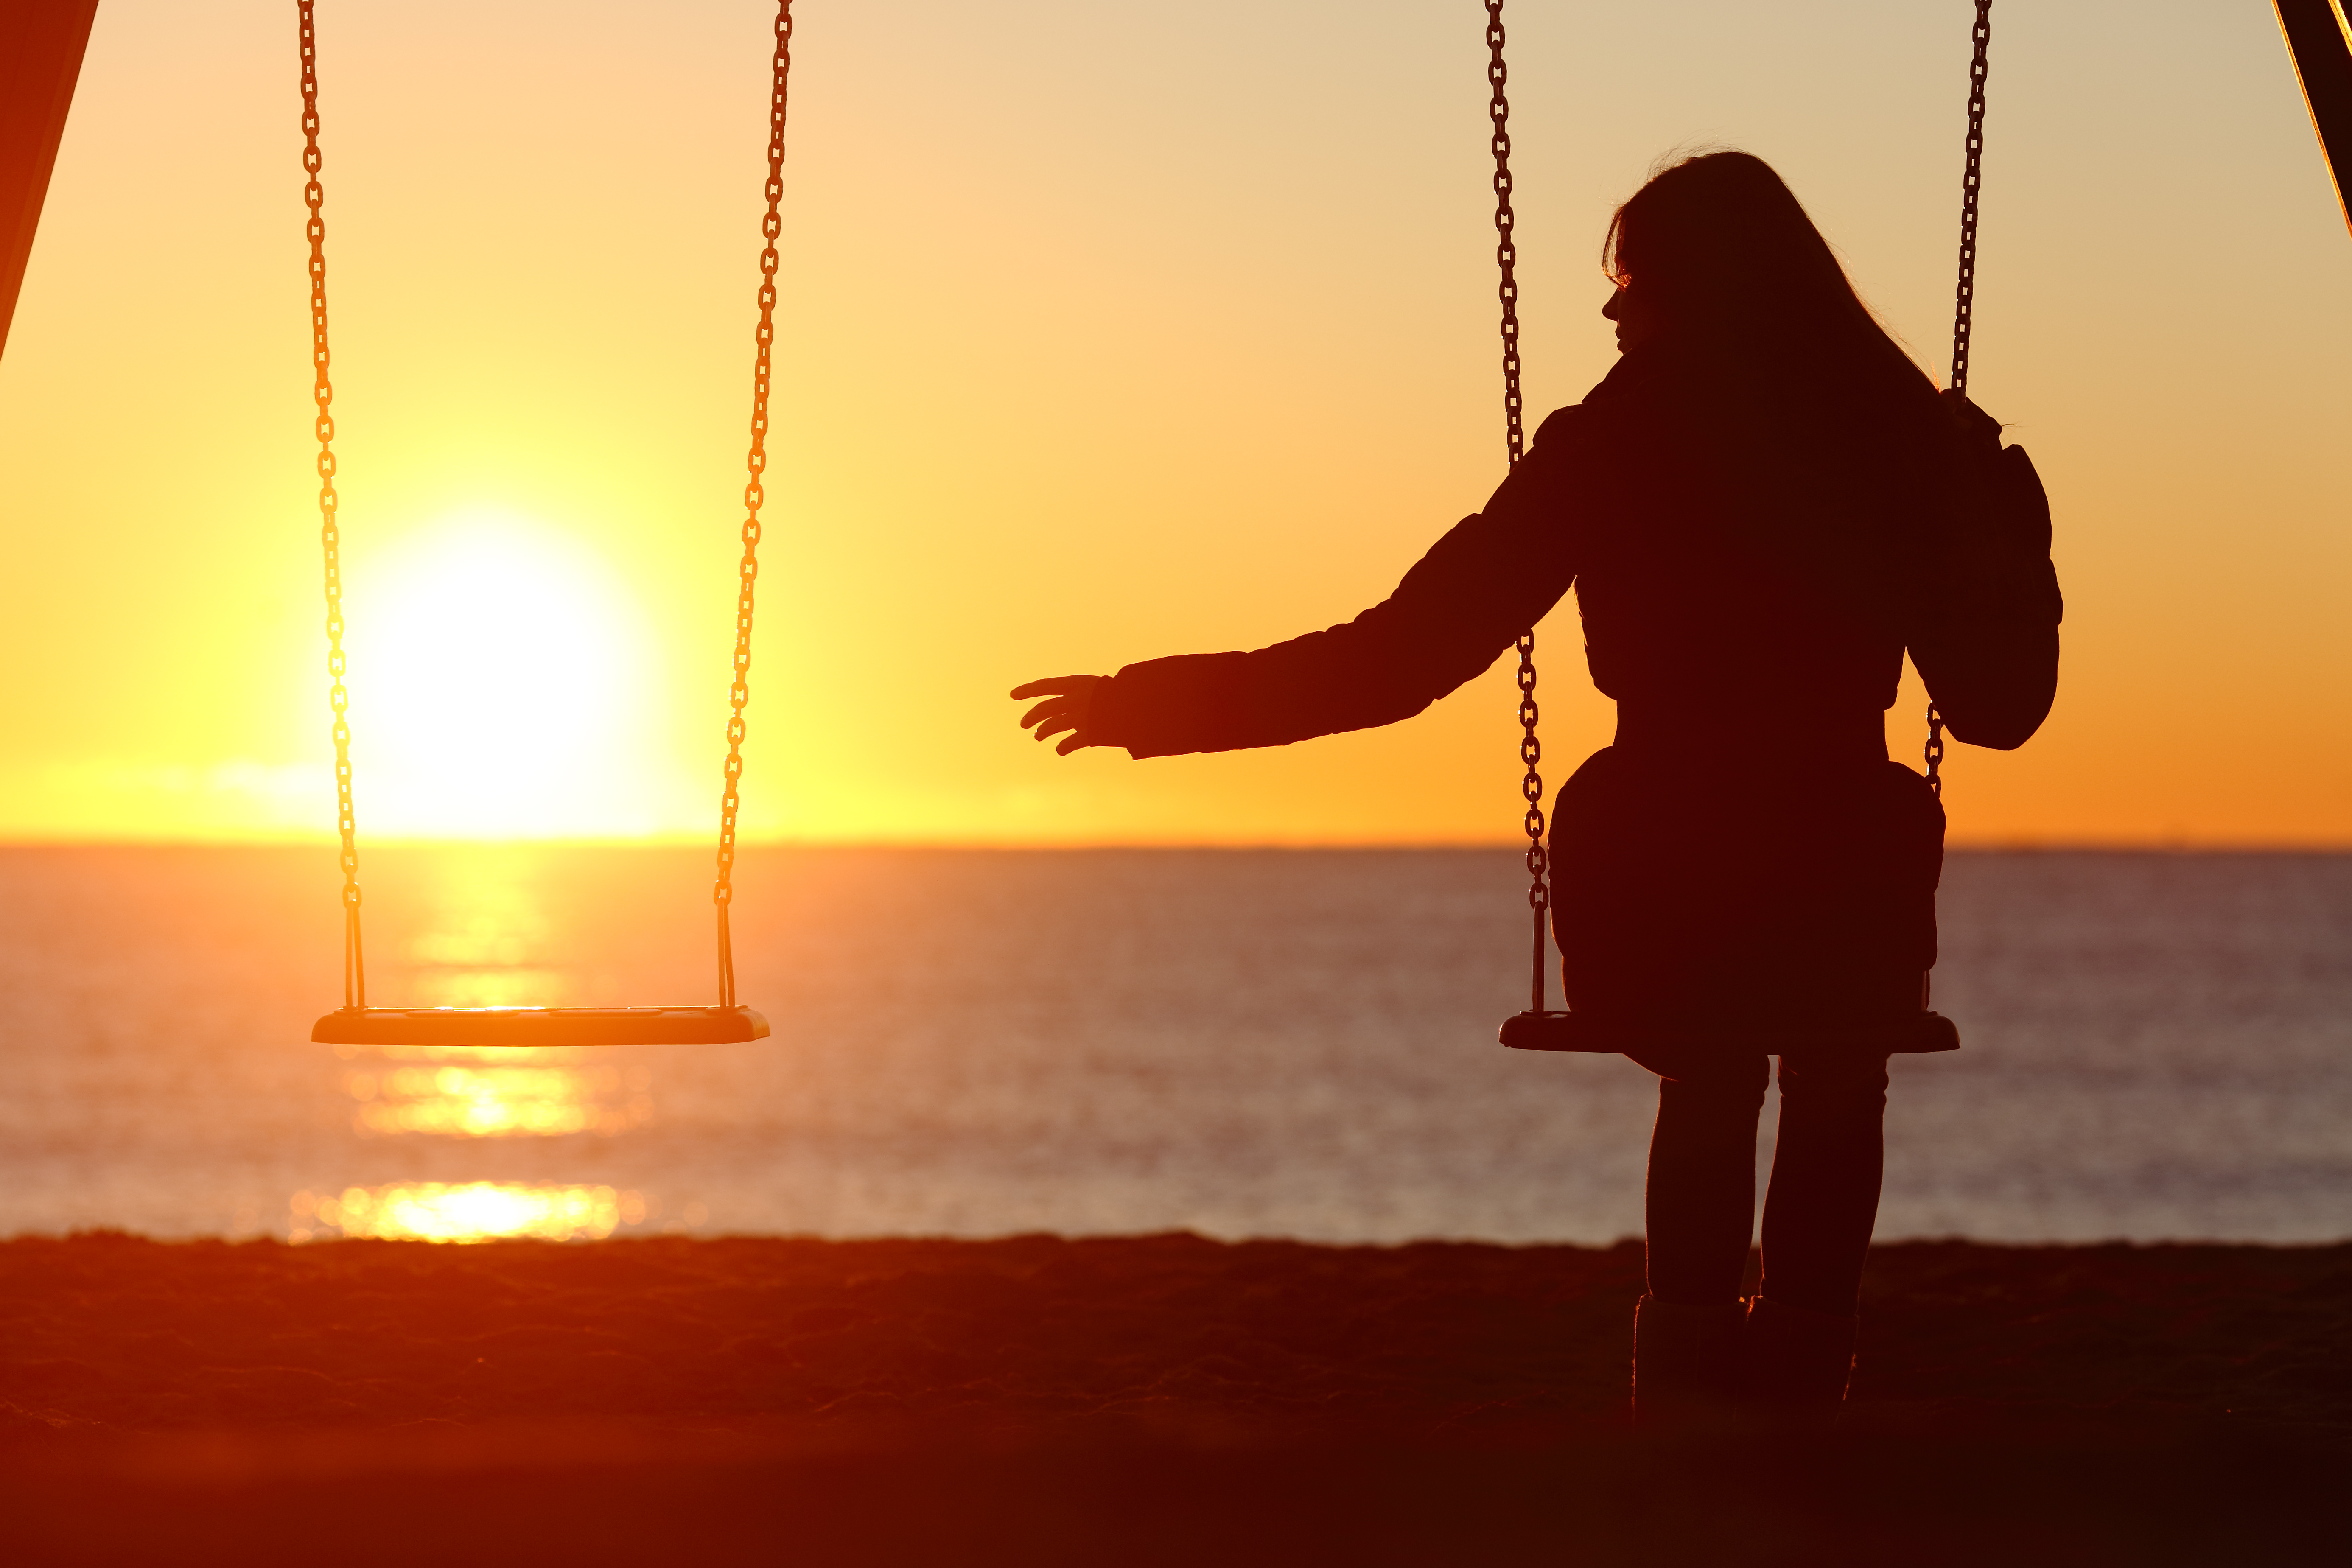 girl swinging next to empty swing in front of sunset